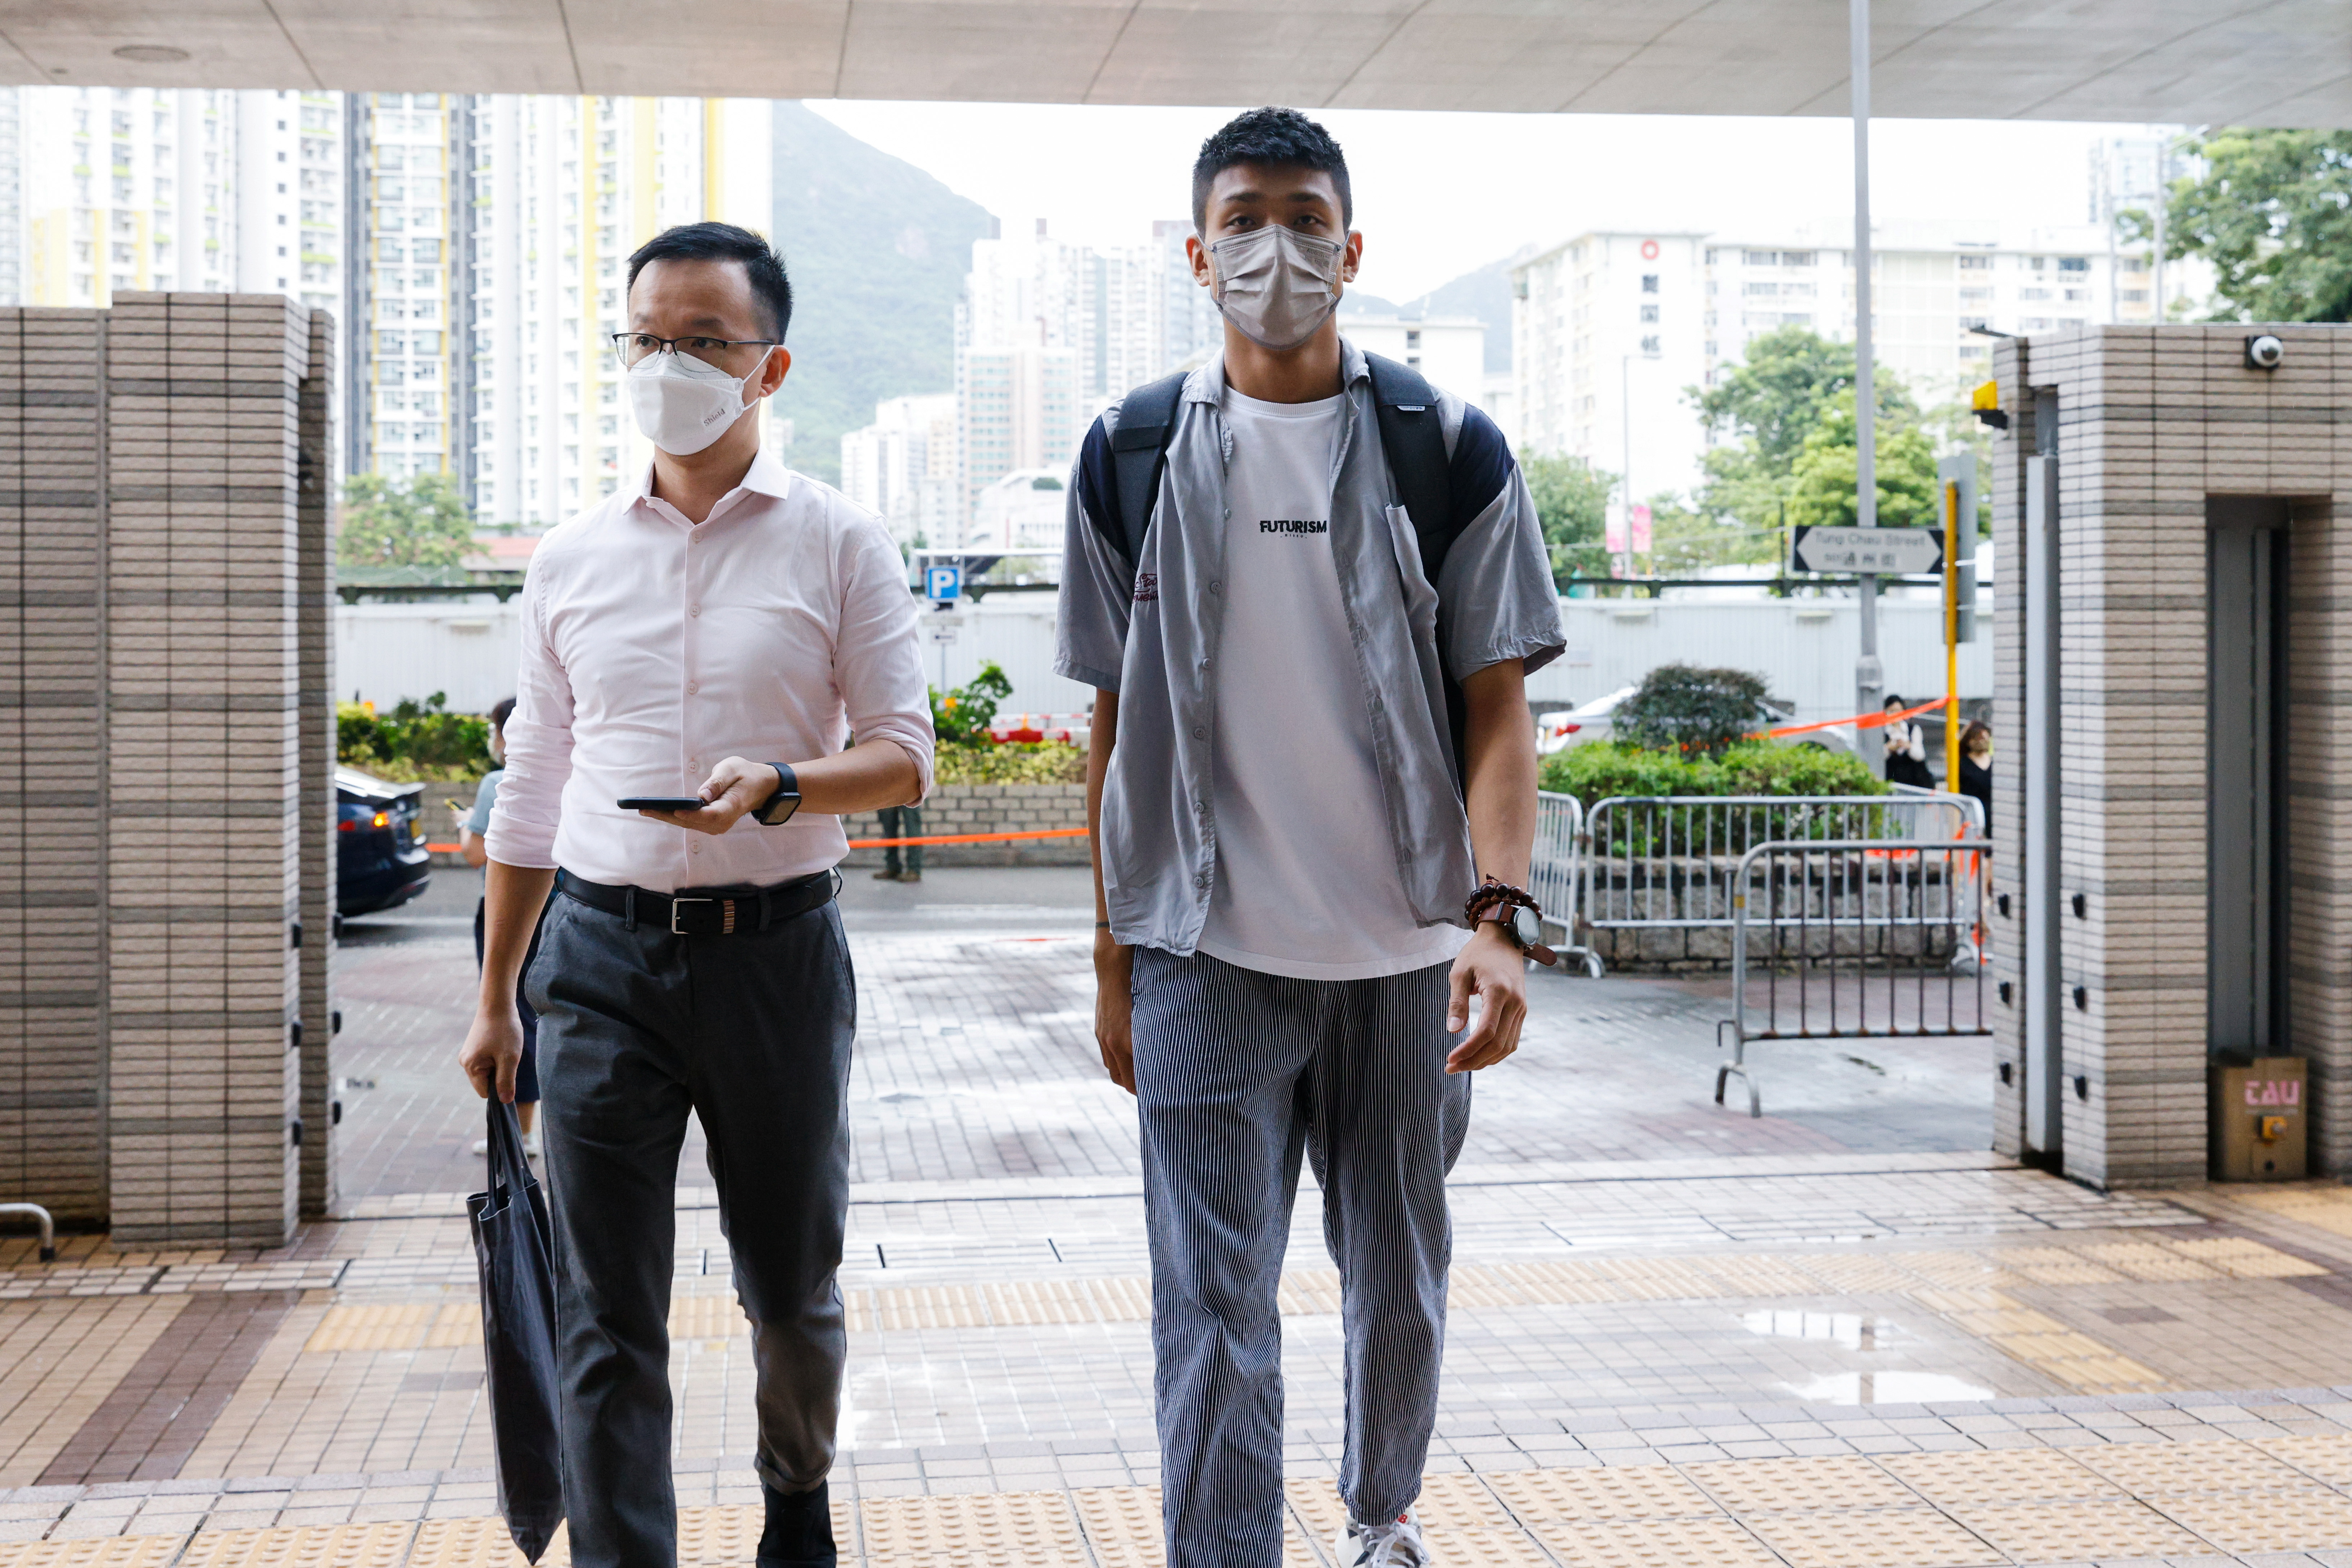 Pro-democracy activist Raymond Chan Chi-chuen and Owen Chow, two of the 47 pro-democracy activists charged with conspiracy to commit subversion under the national security law, arrive West Kowloon Magistrates's Courts building, in Hong Kong